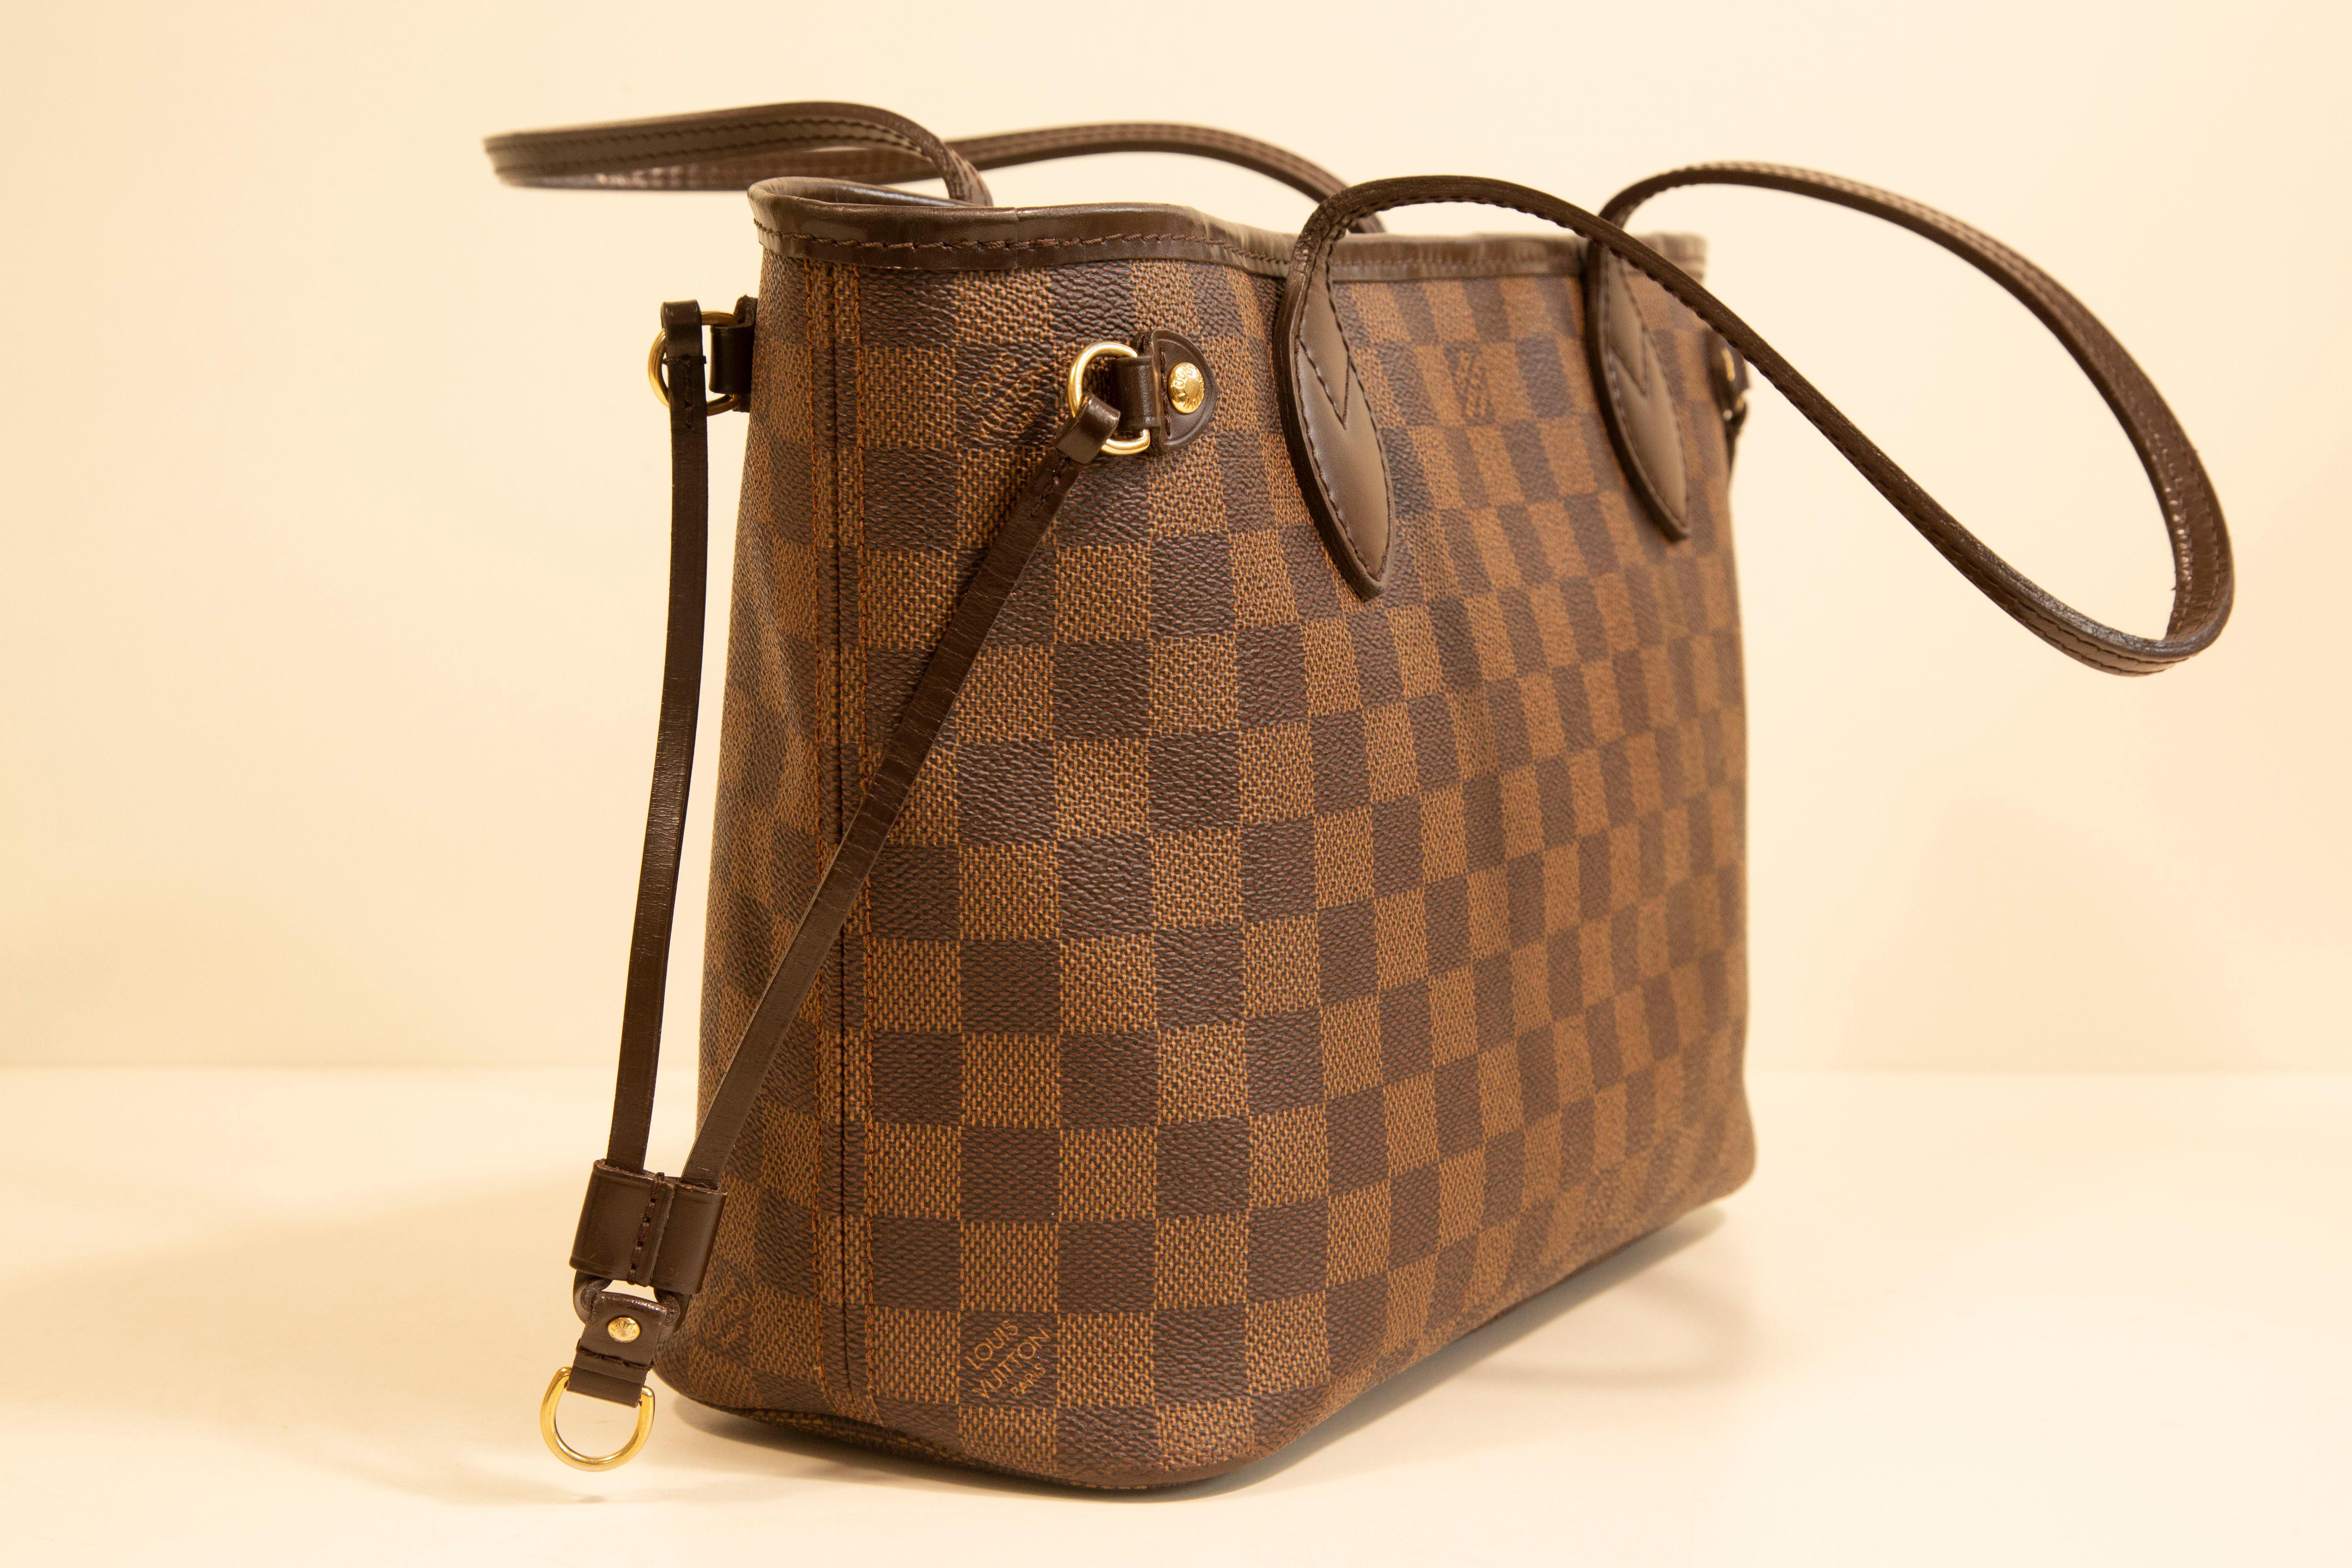 Louis Vuitton Neverfull PM Tote Shoulder Bag in Damier Ebene For Sale 3